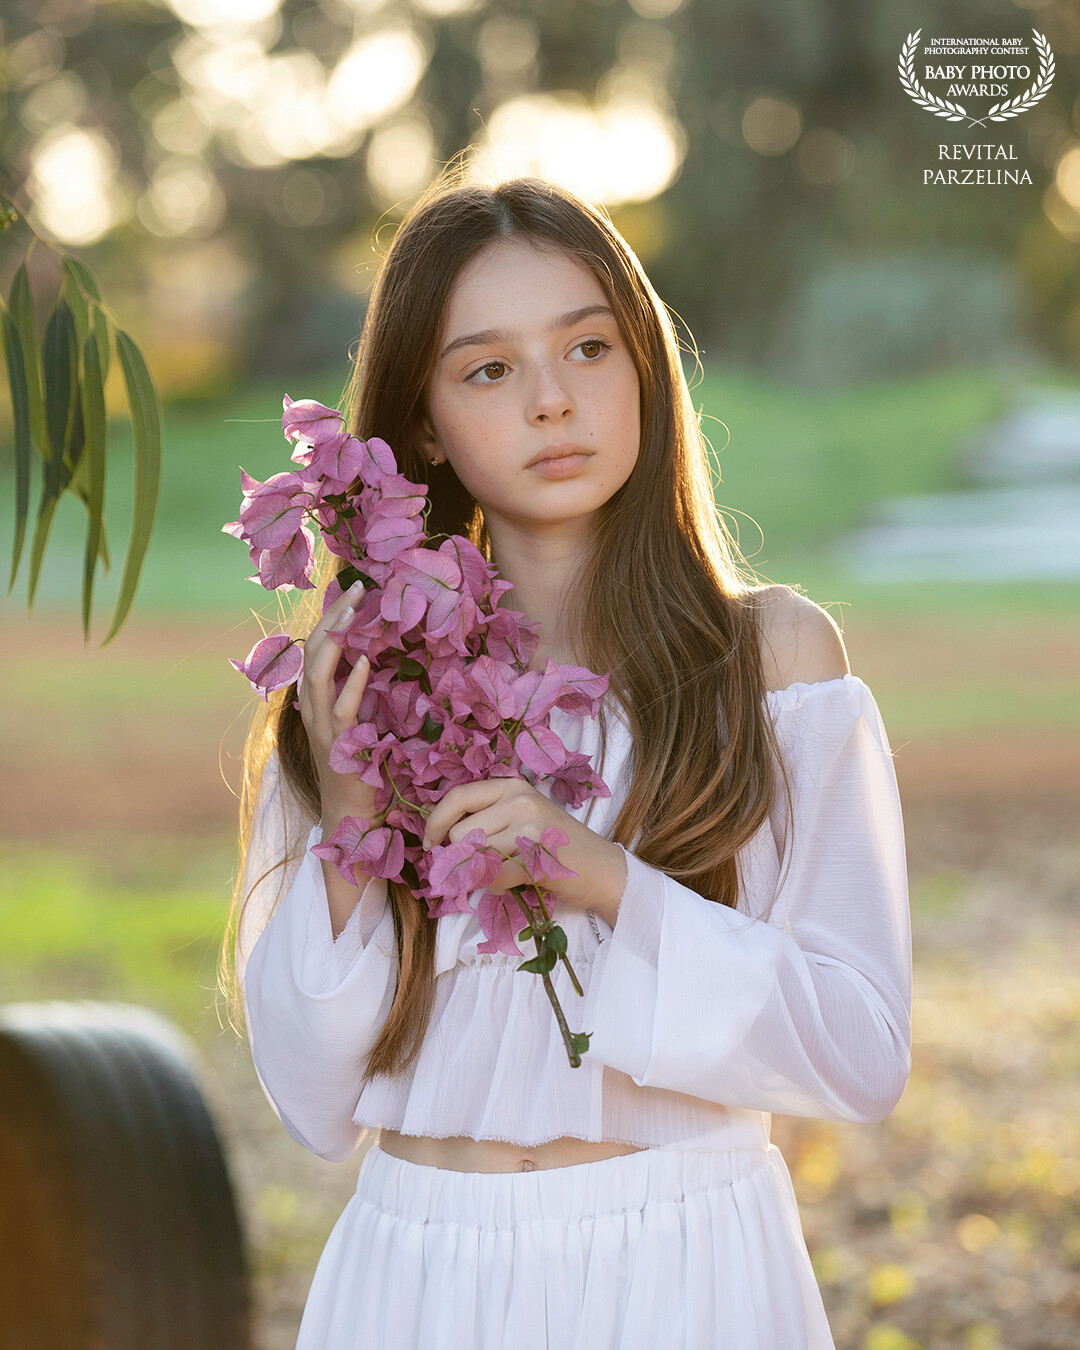 The composition of the image captures the harmony between Raz and the natural world. The soft focus creates a dreamy ambiance, while the vibrant colors of the park's flora add a touch of enchantment to the scene. "Innocence Unveiled" is a celebration of youth, curiosity, and the magic of the everyday world seen through the eyes of a child.